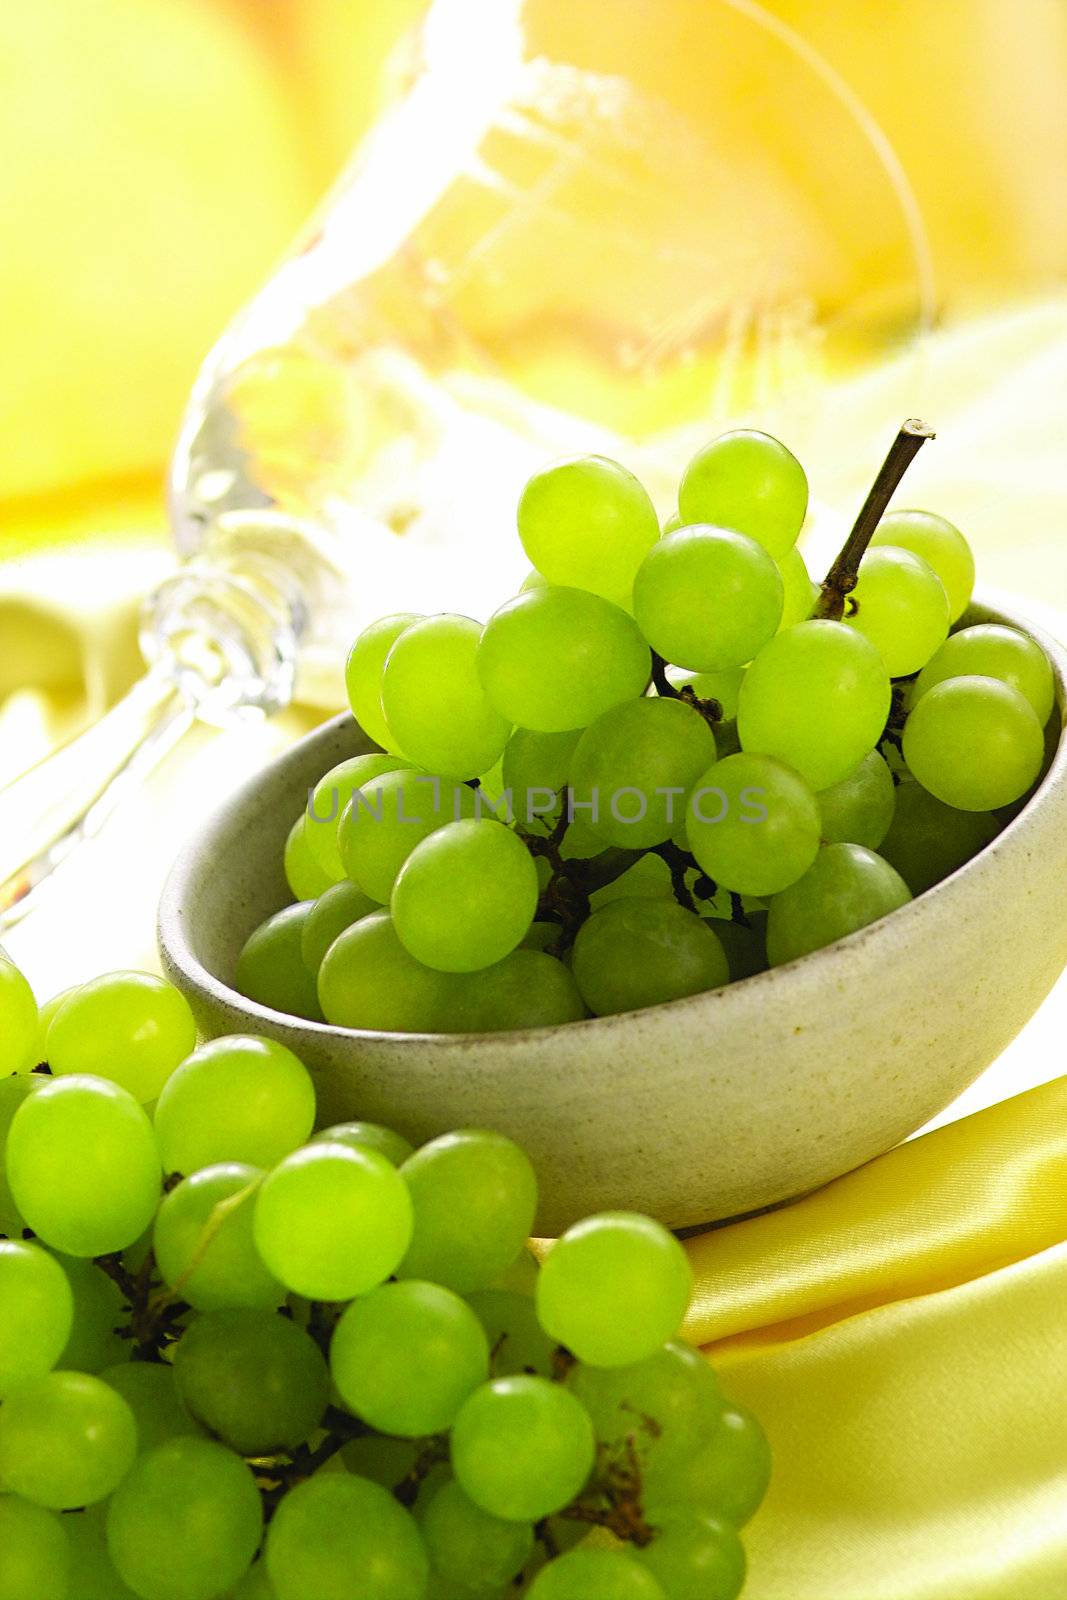 Fruit Photography fresh grape on the tray and table